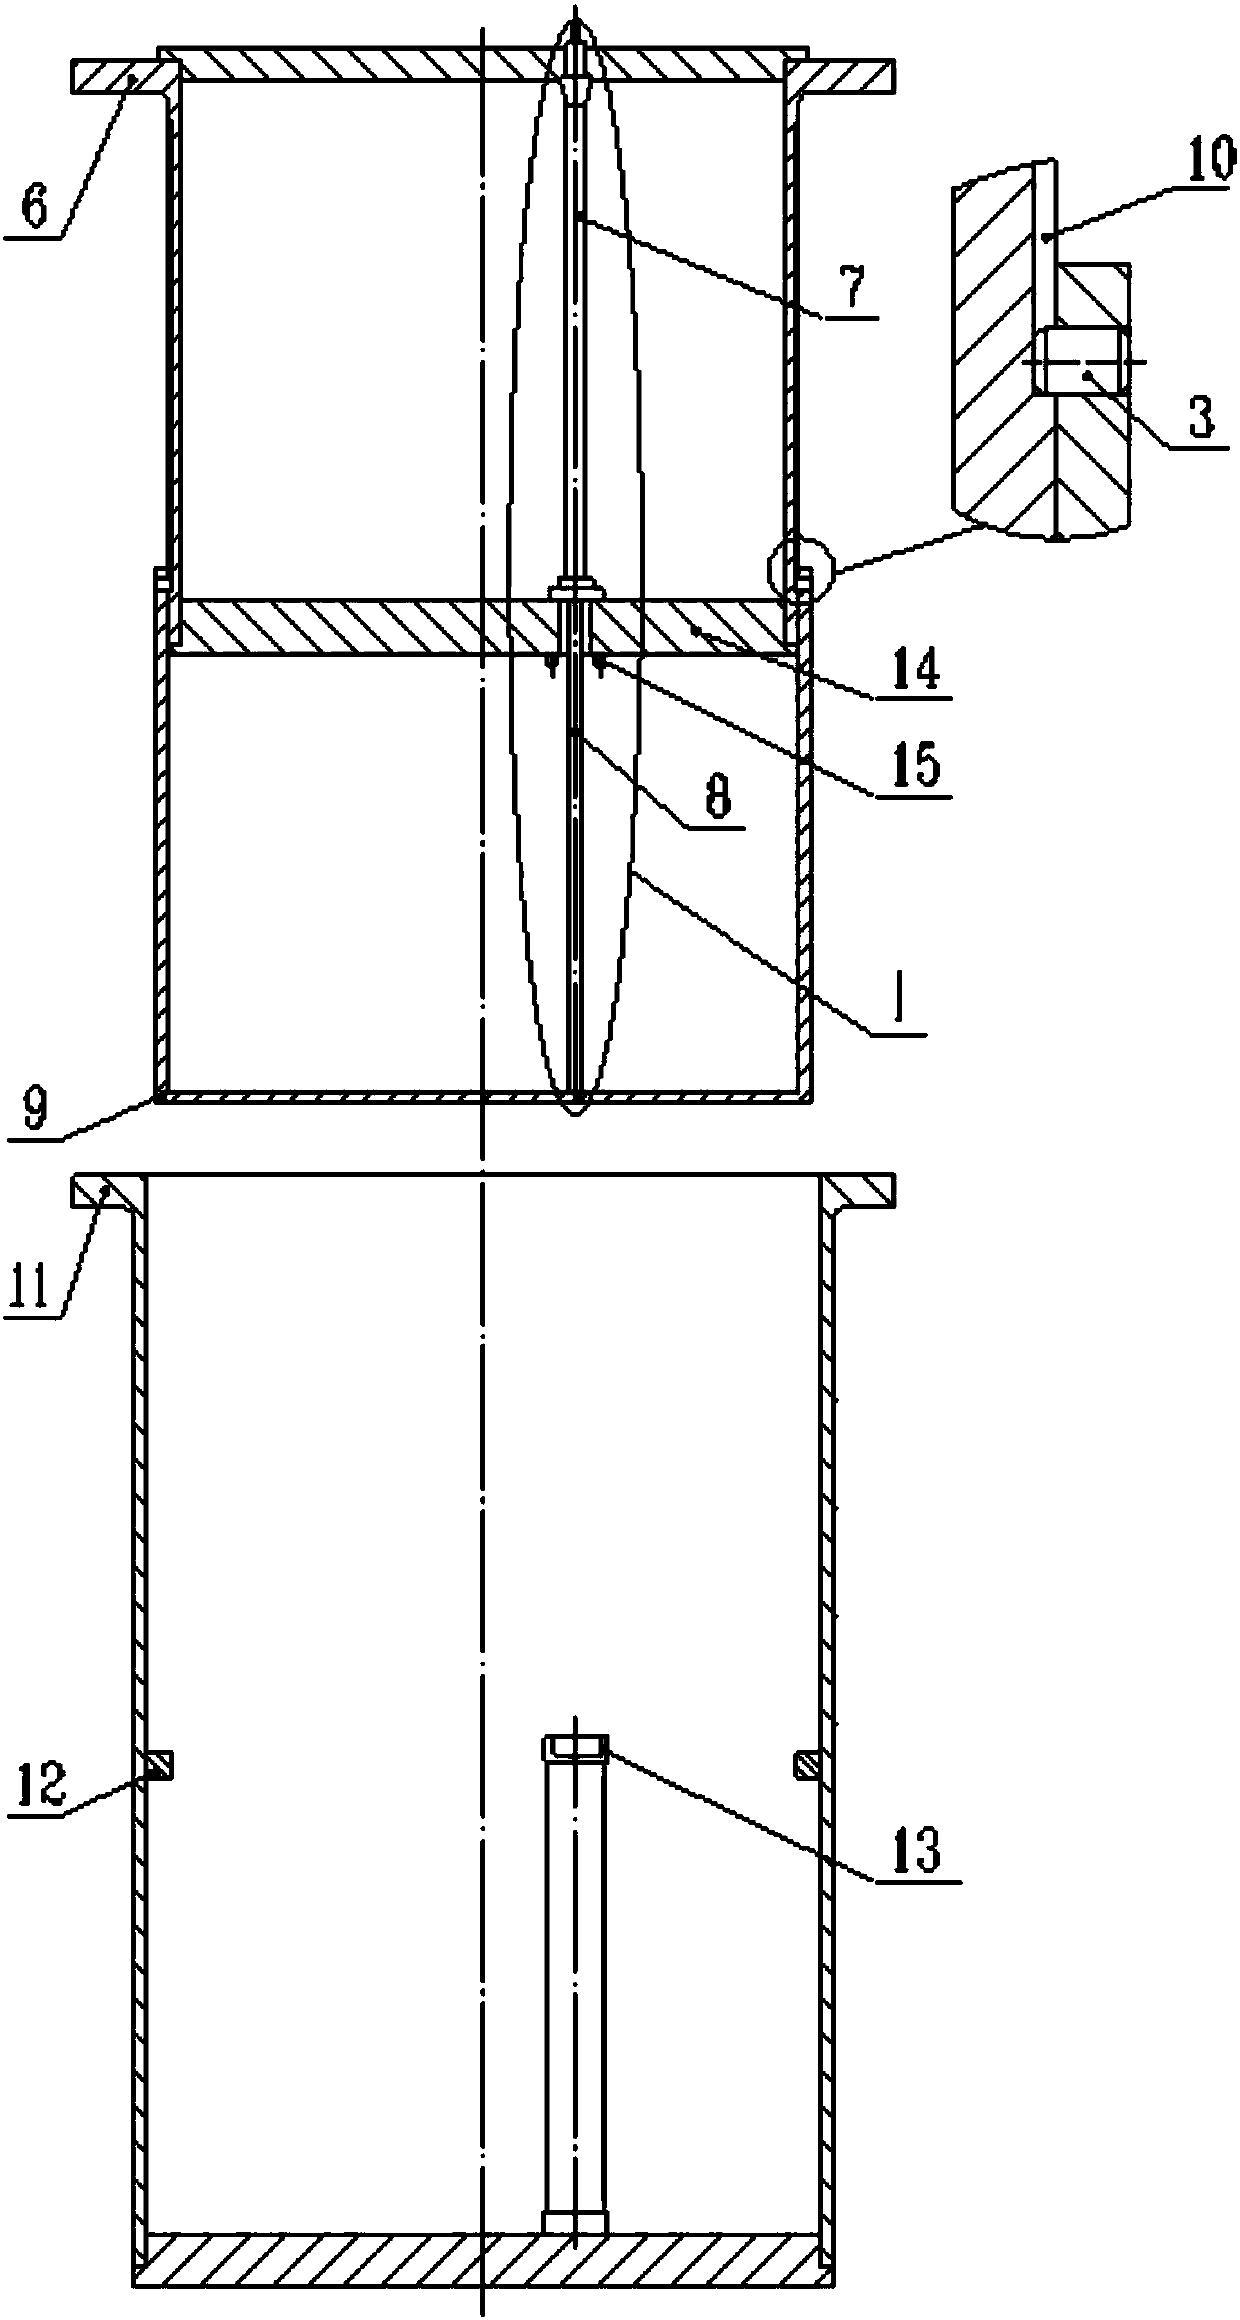 Limiting plate structure, upper reactor inner component and suspension basket component